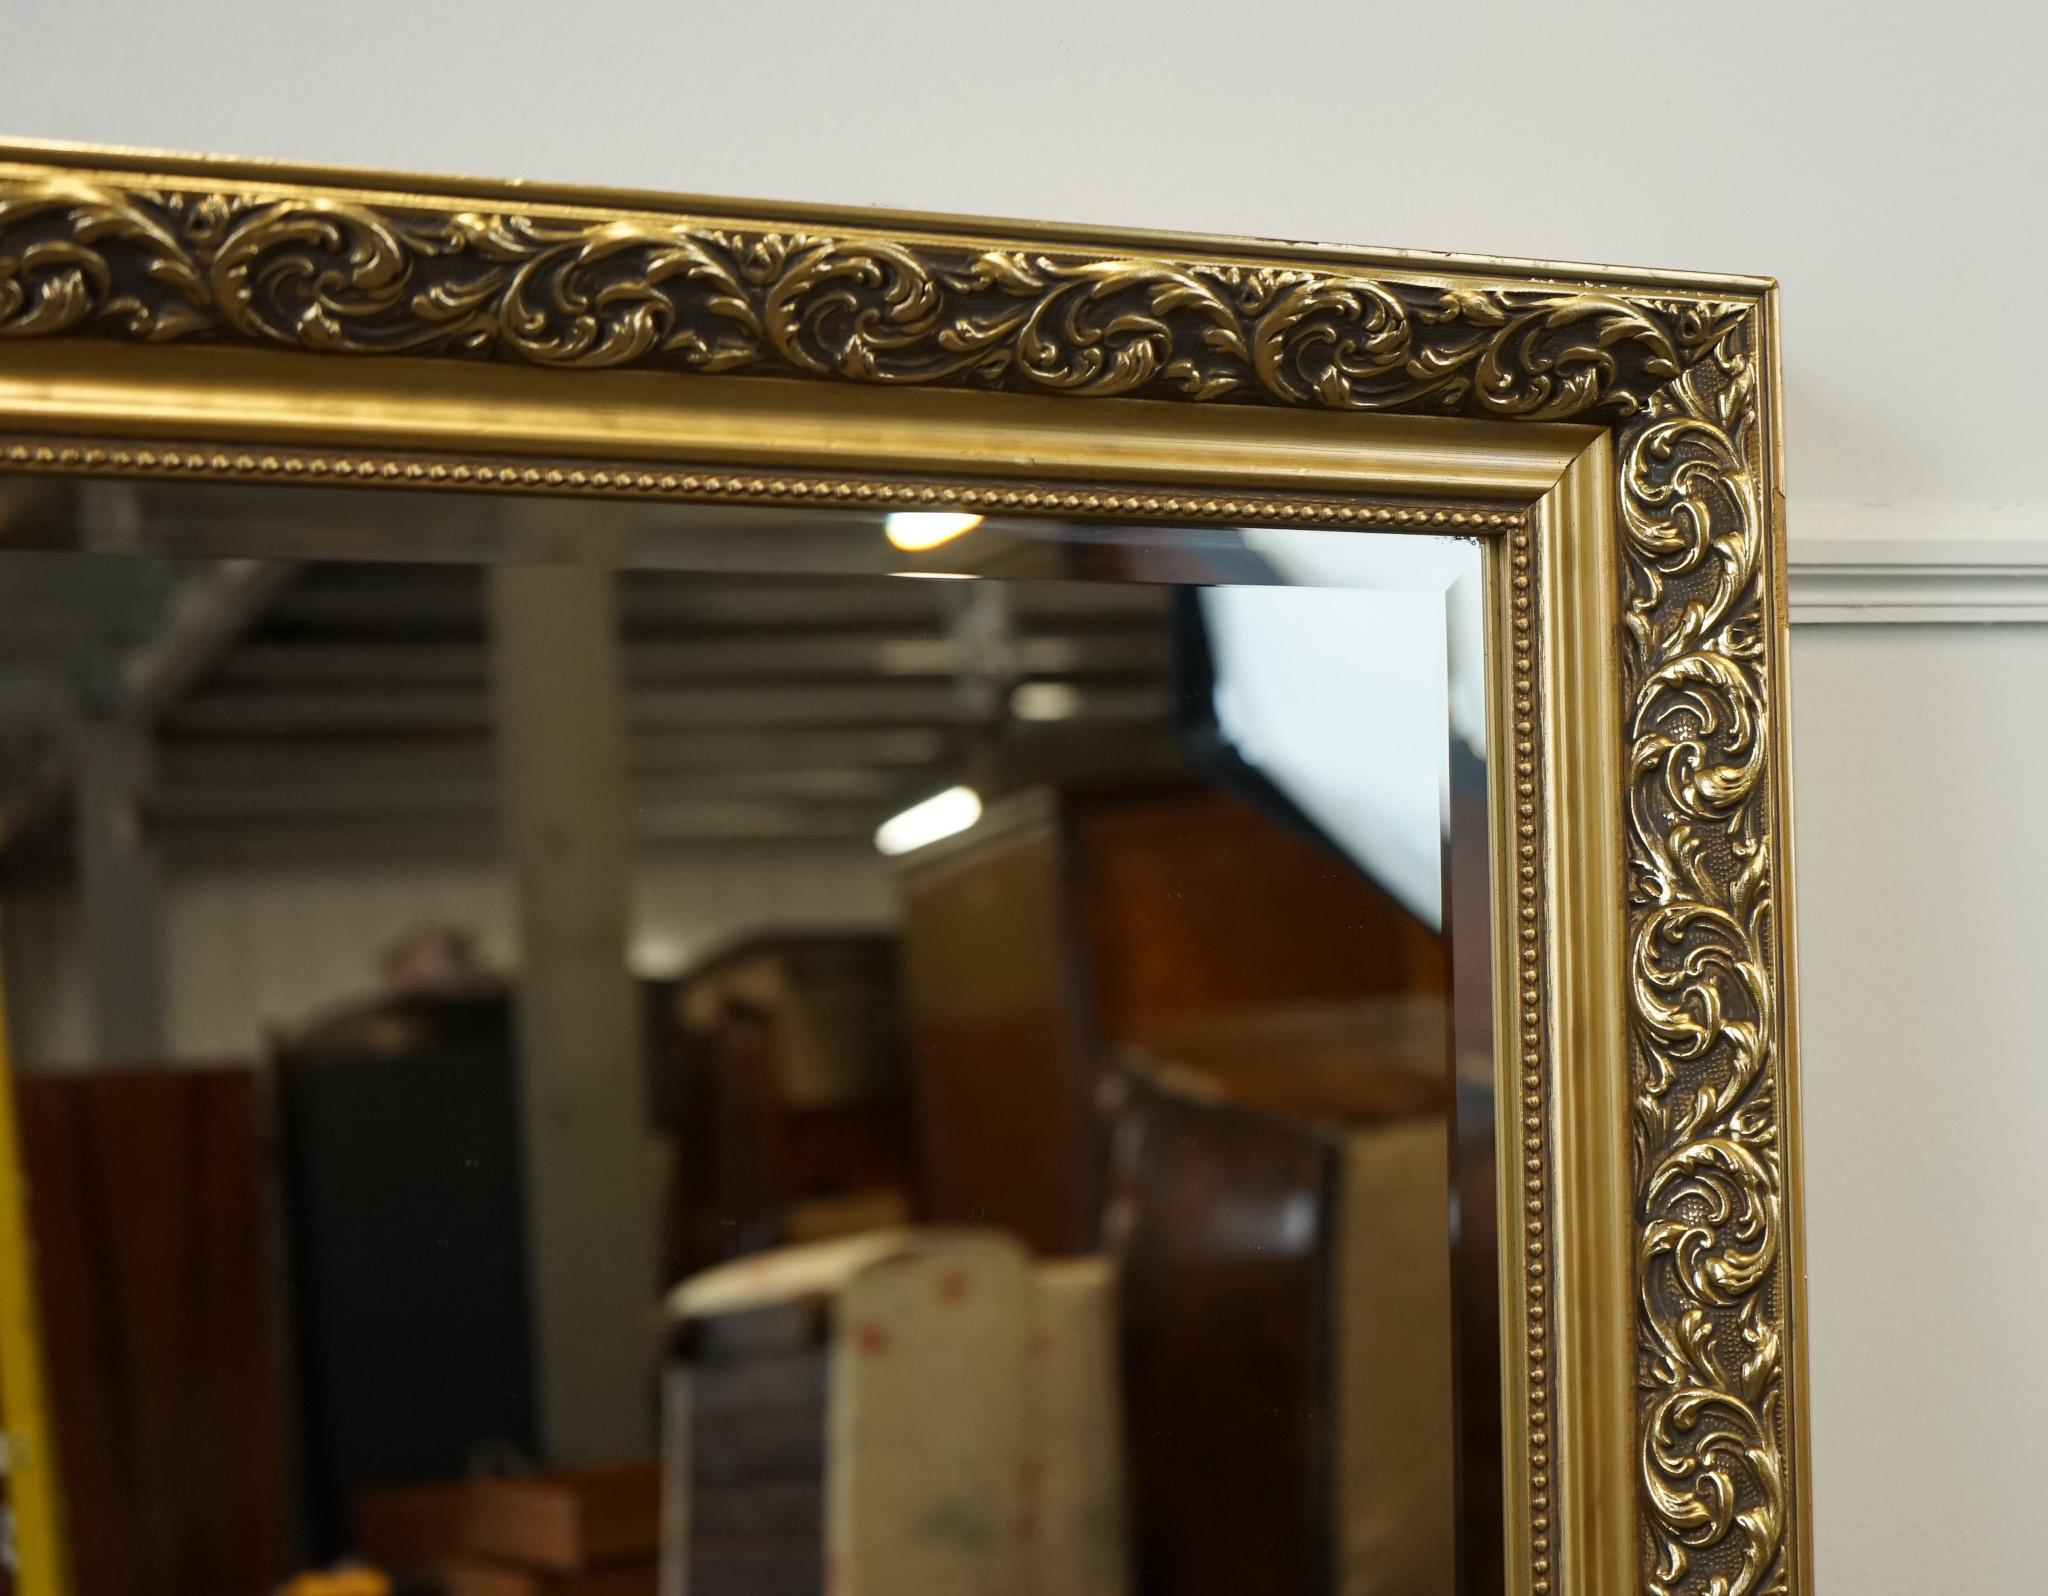 LOVELY VINTAGE LARGE GOLD ORNATE BEVELLED MiRROR In Good Condition For Sale In Pulborough, GB